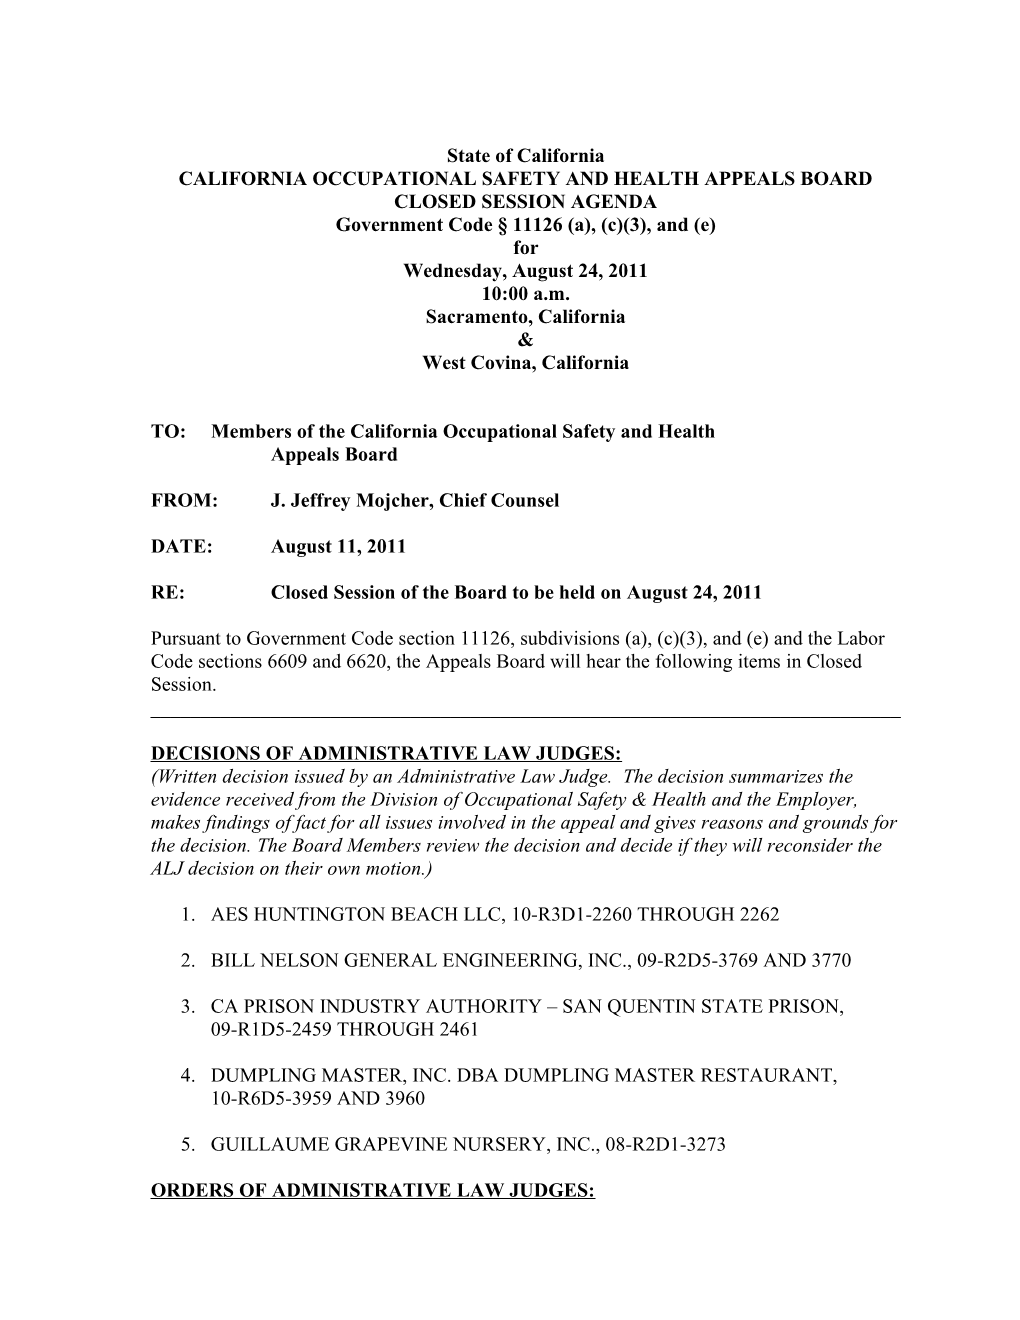 California Occupational Safety & Health Appeals Board s2